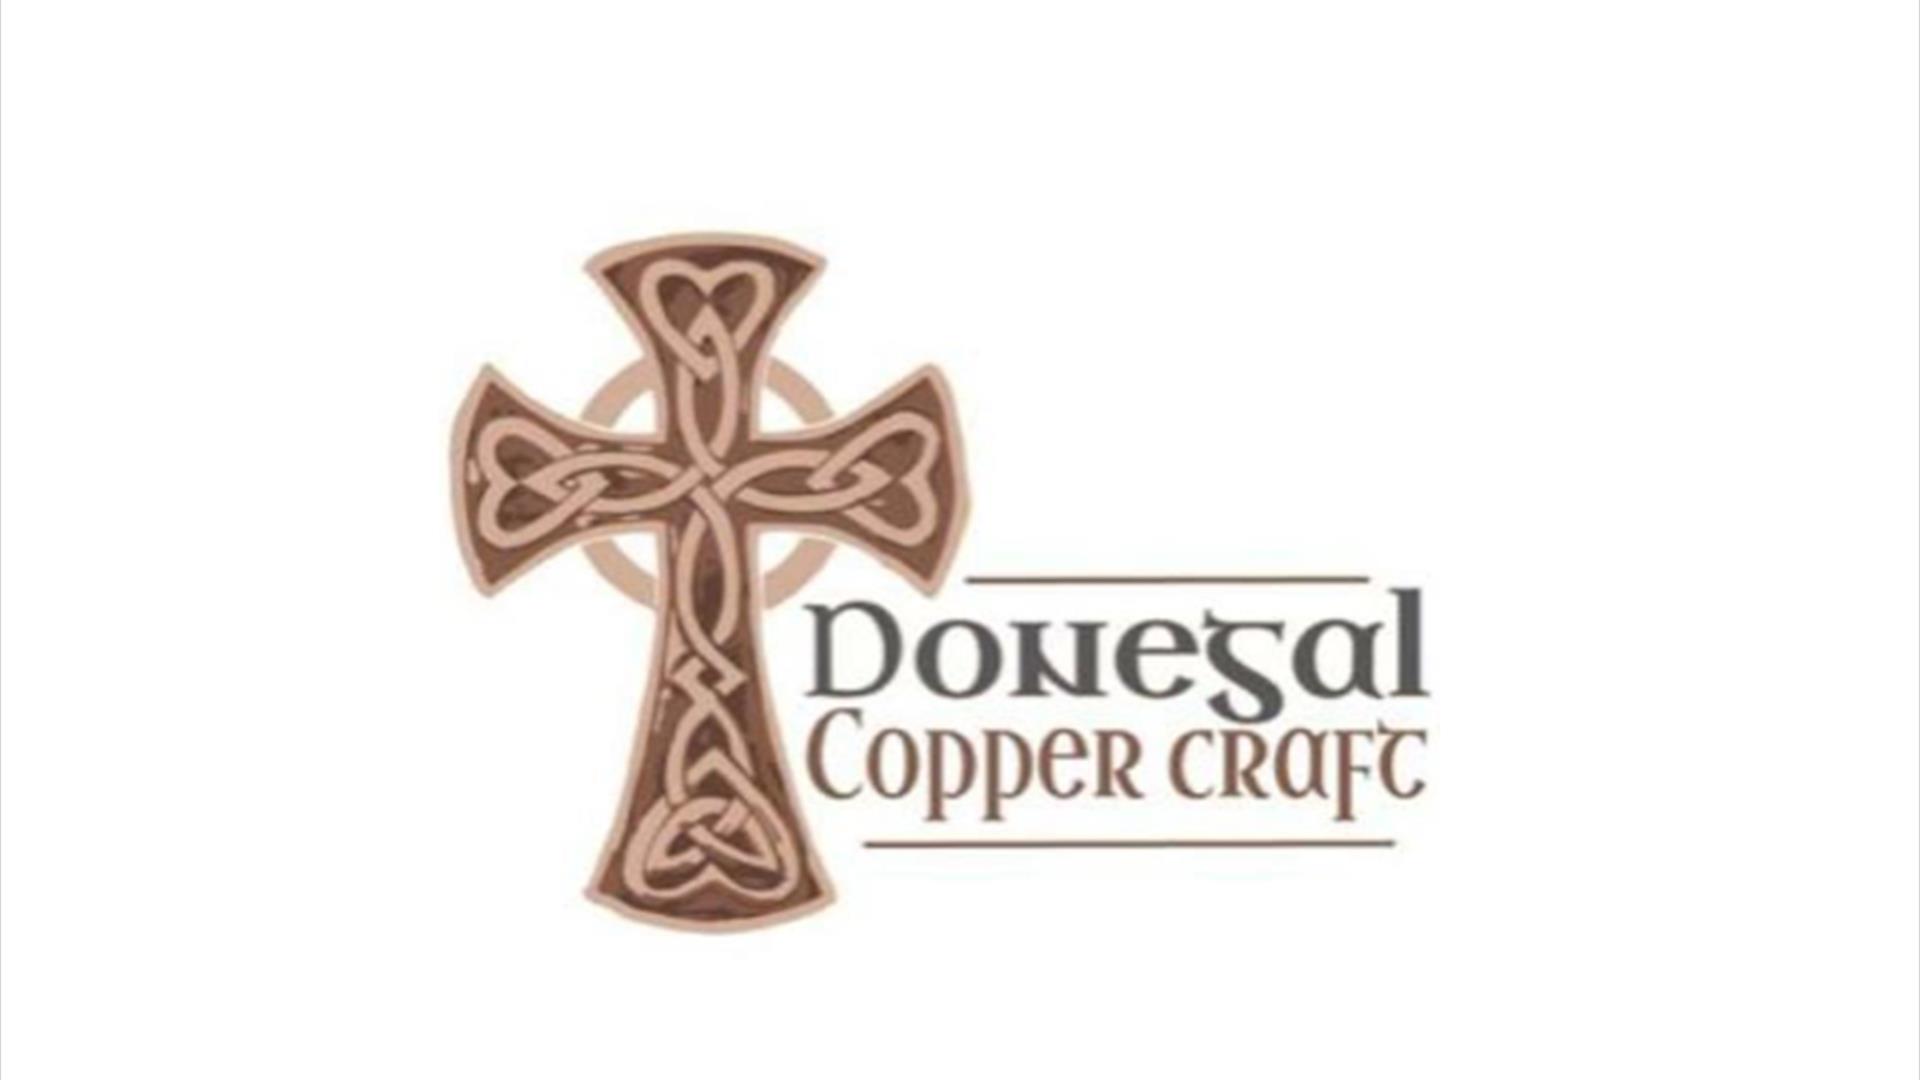 Image of a brown Celtic cross and Gonegal copper craft written